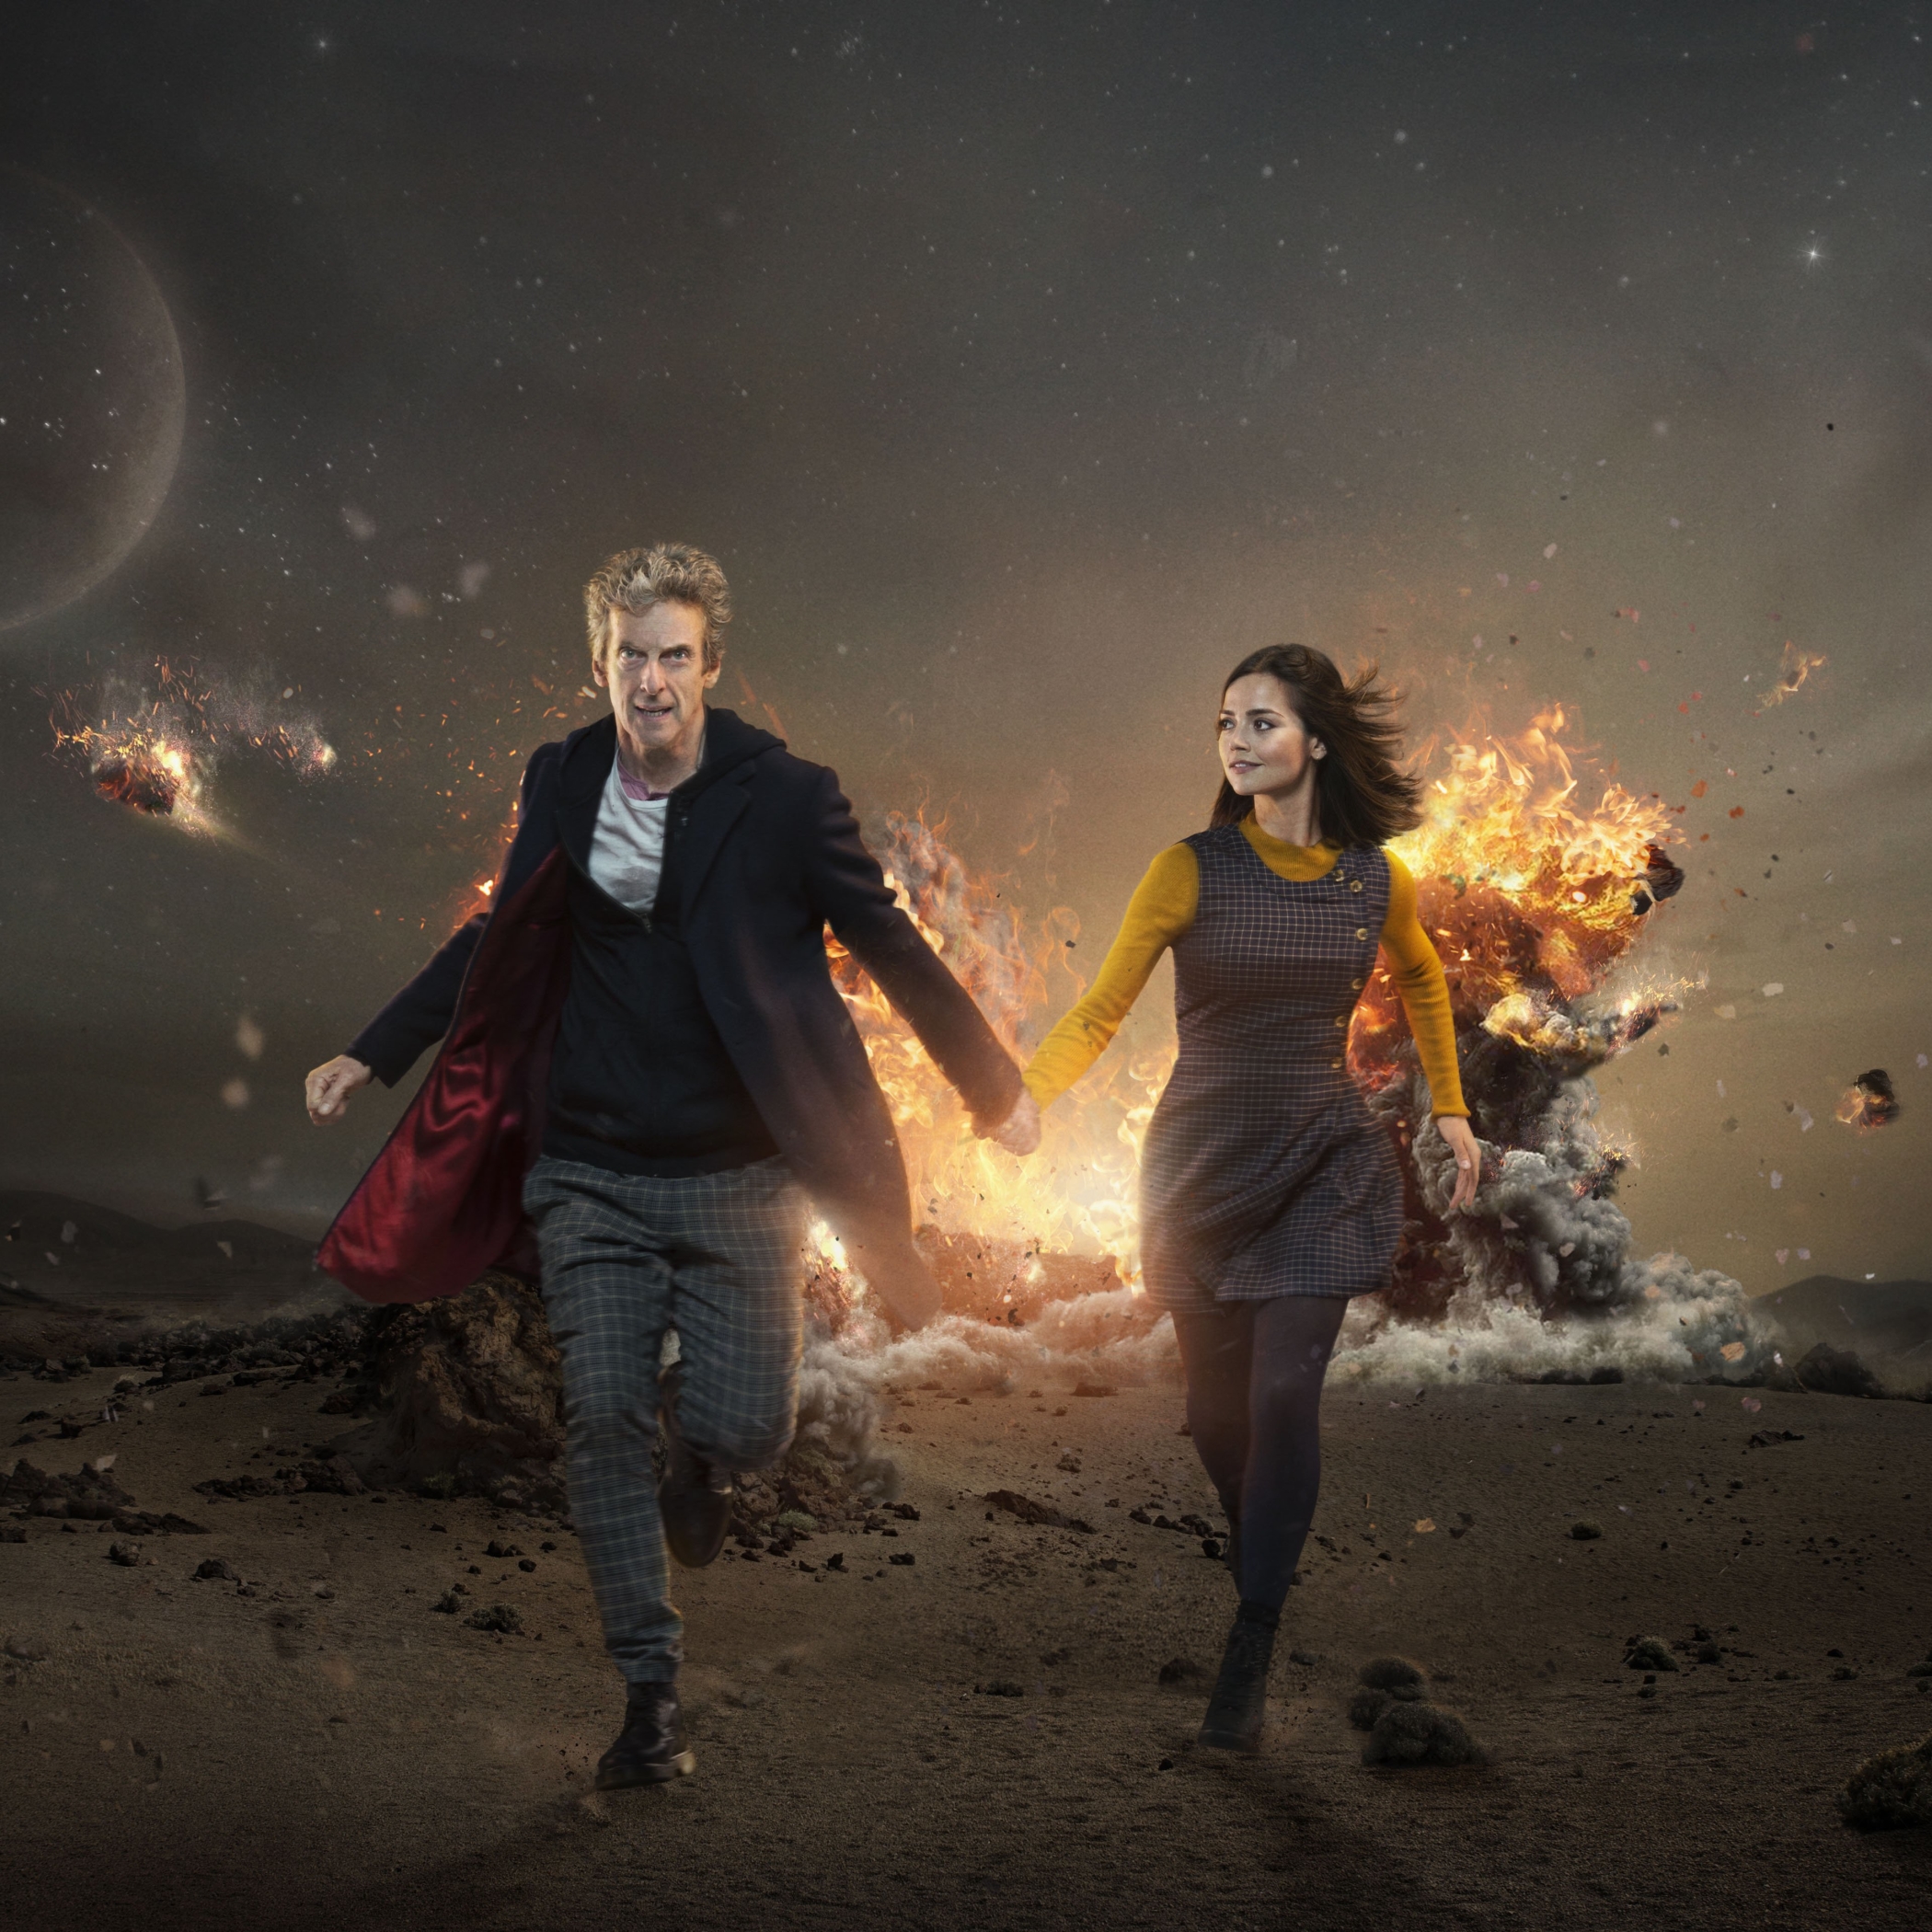 Doctor Who Pfp